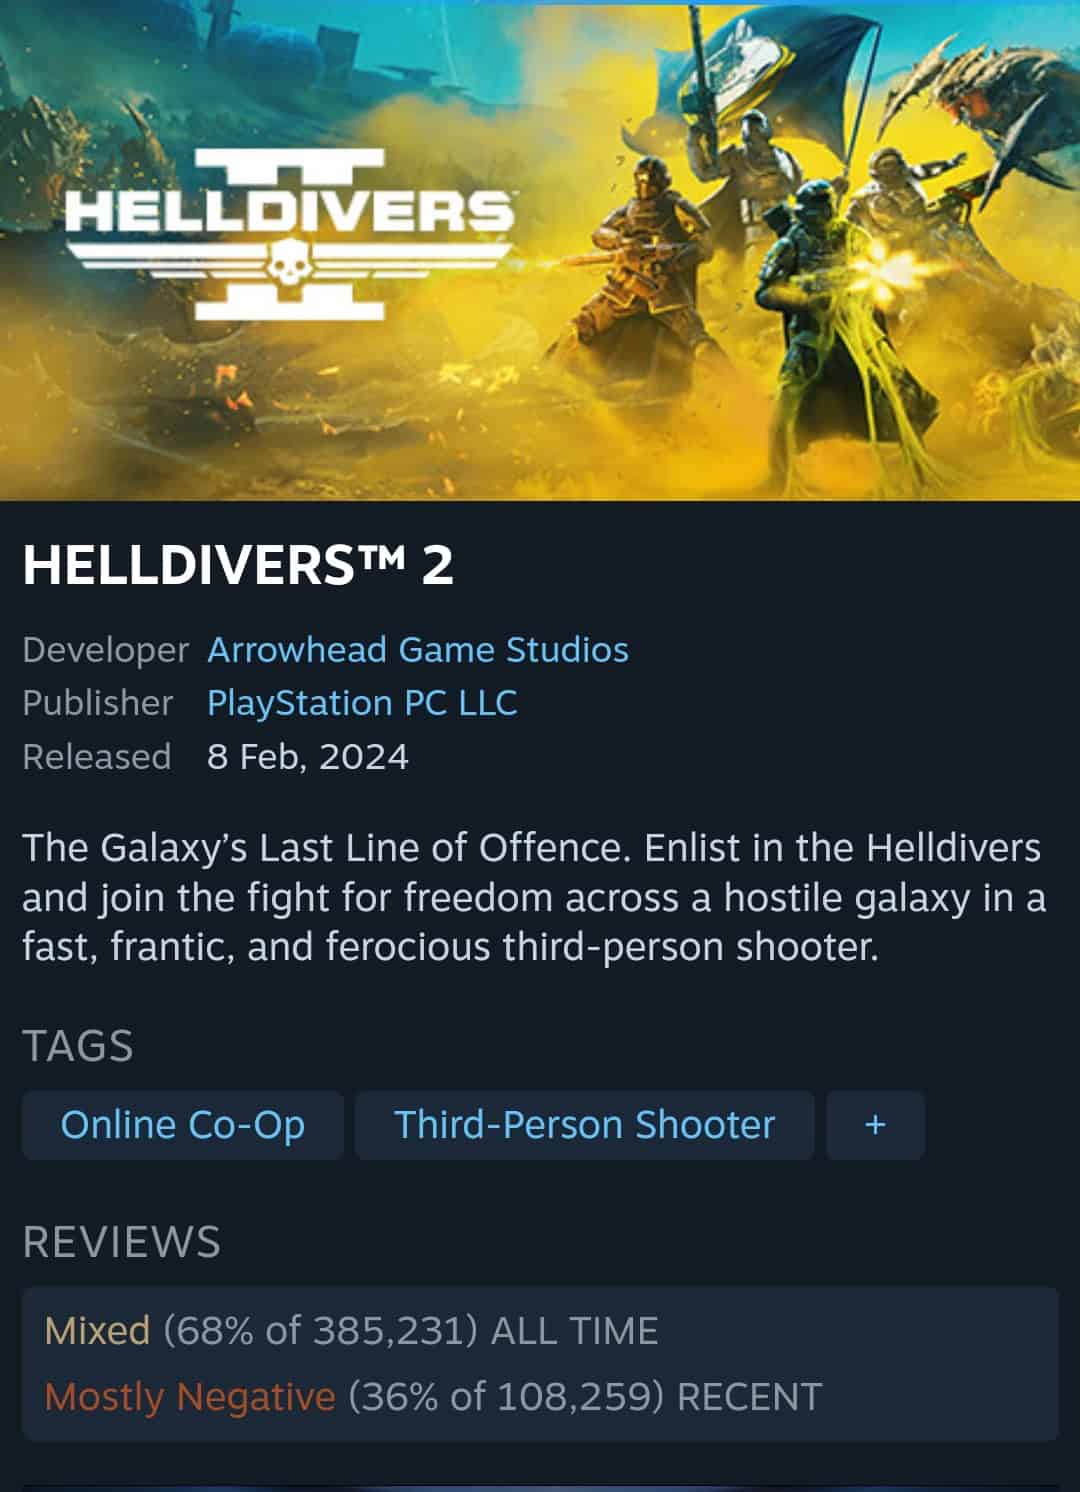 Promotional poster for "Helldivers 2" game, featuring soldiers in combat against alien creatures, with release details and user reviews.